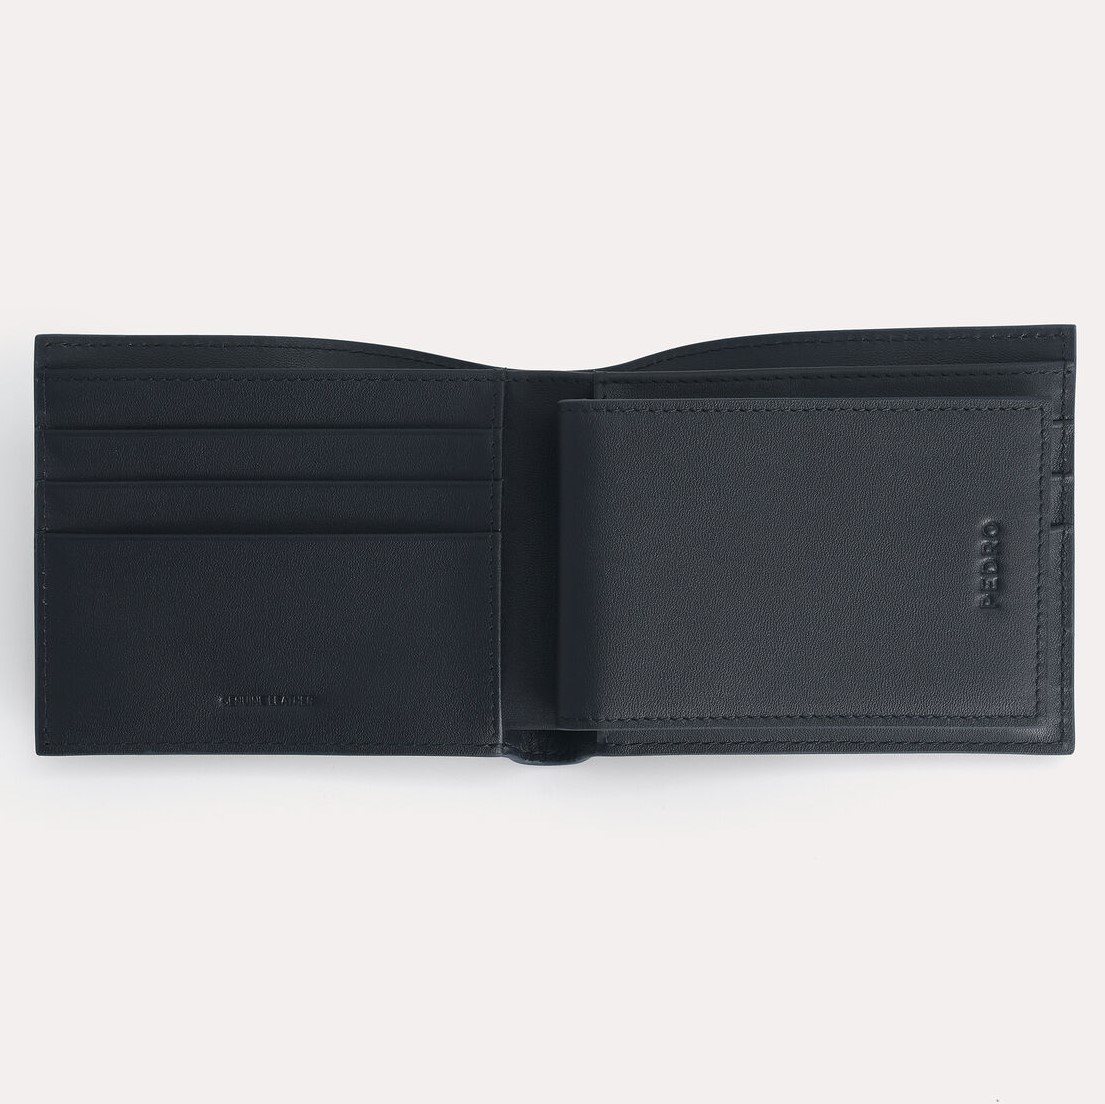  VÍ NAM PEDRO TEXTURED LEATHER BI-FOLD WALLET WITH INSERT 6